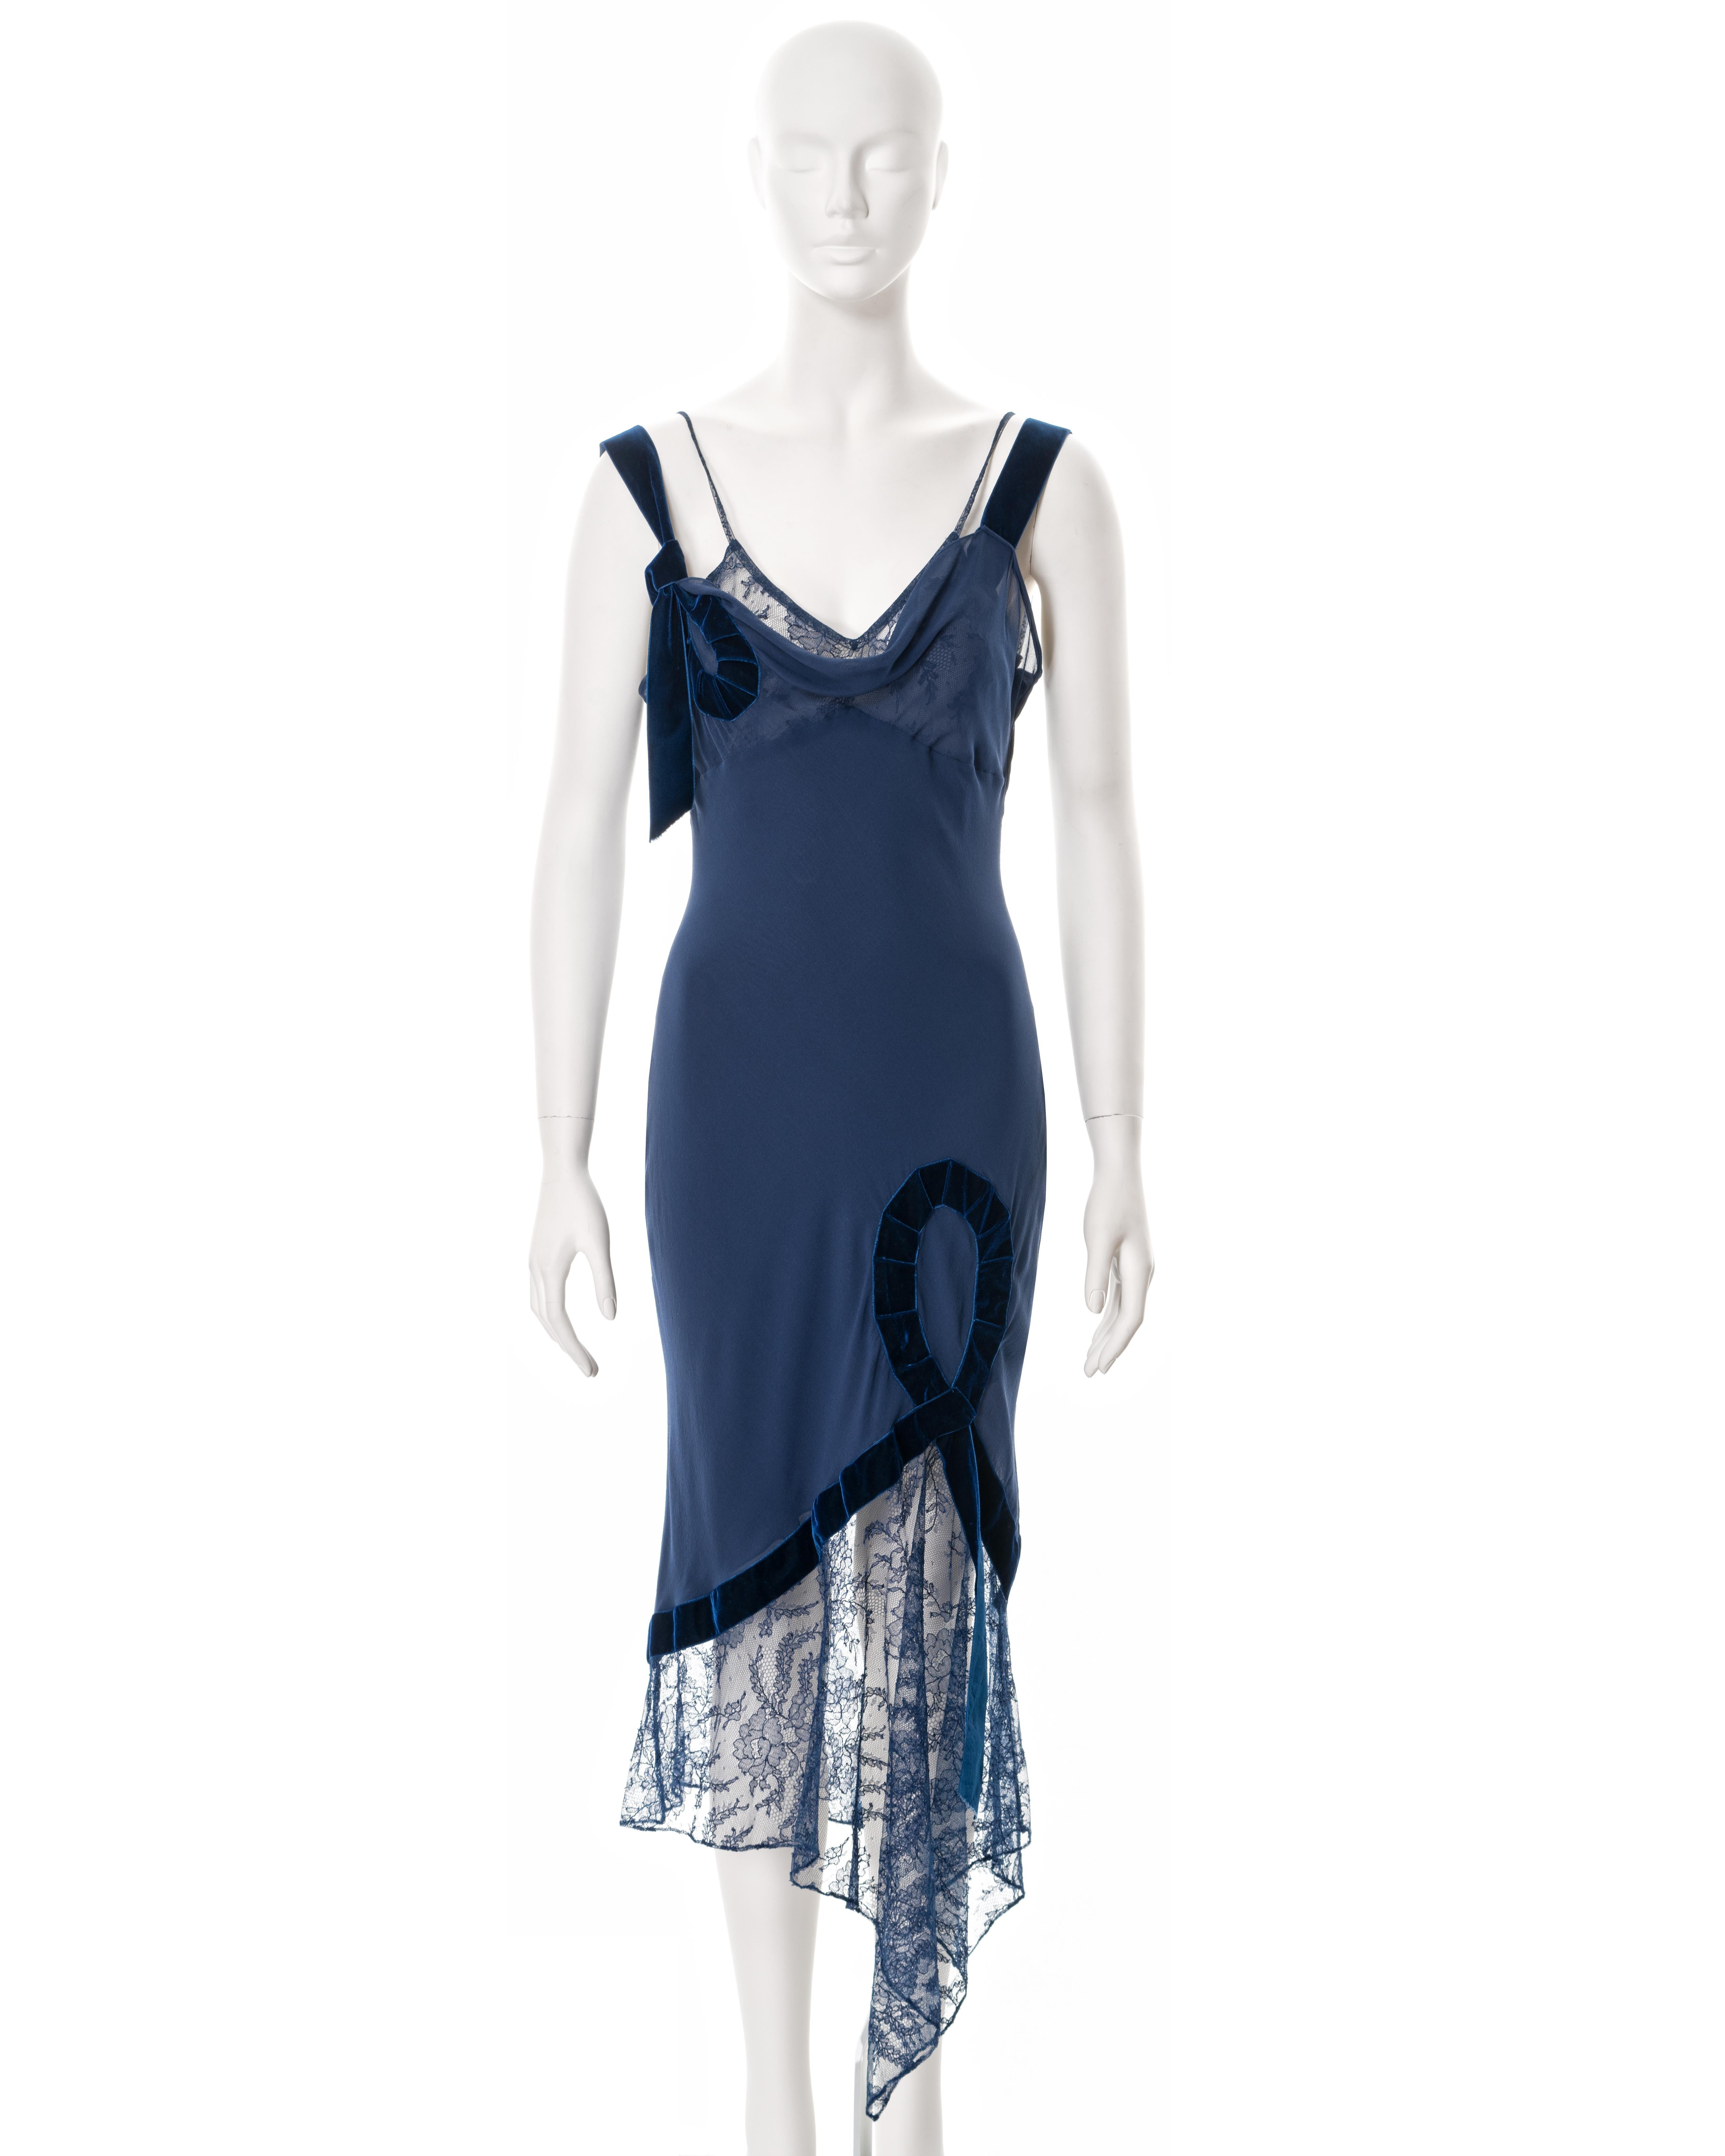 ▪ John Galliano evening dress
▪ Sold by One of a Kind Archive
▪ Fall-Winter 2001
▪ Constructed from blue bias-cut silk 
▪ Blue lace underlay and skirt 
▪ Cowl neckline 
▪ Velvet ribbon trim and shoulder straps 
▪ Size FR 40 - UK 12 - US 6
▪ Made in